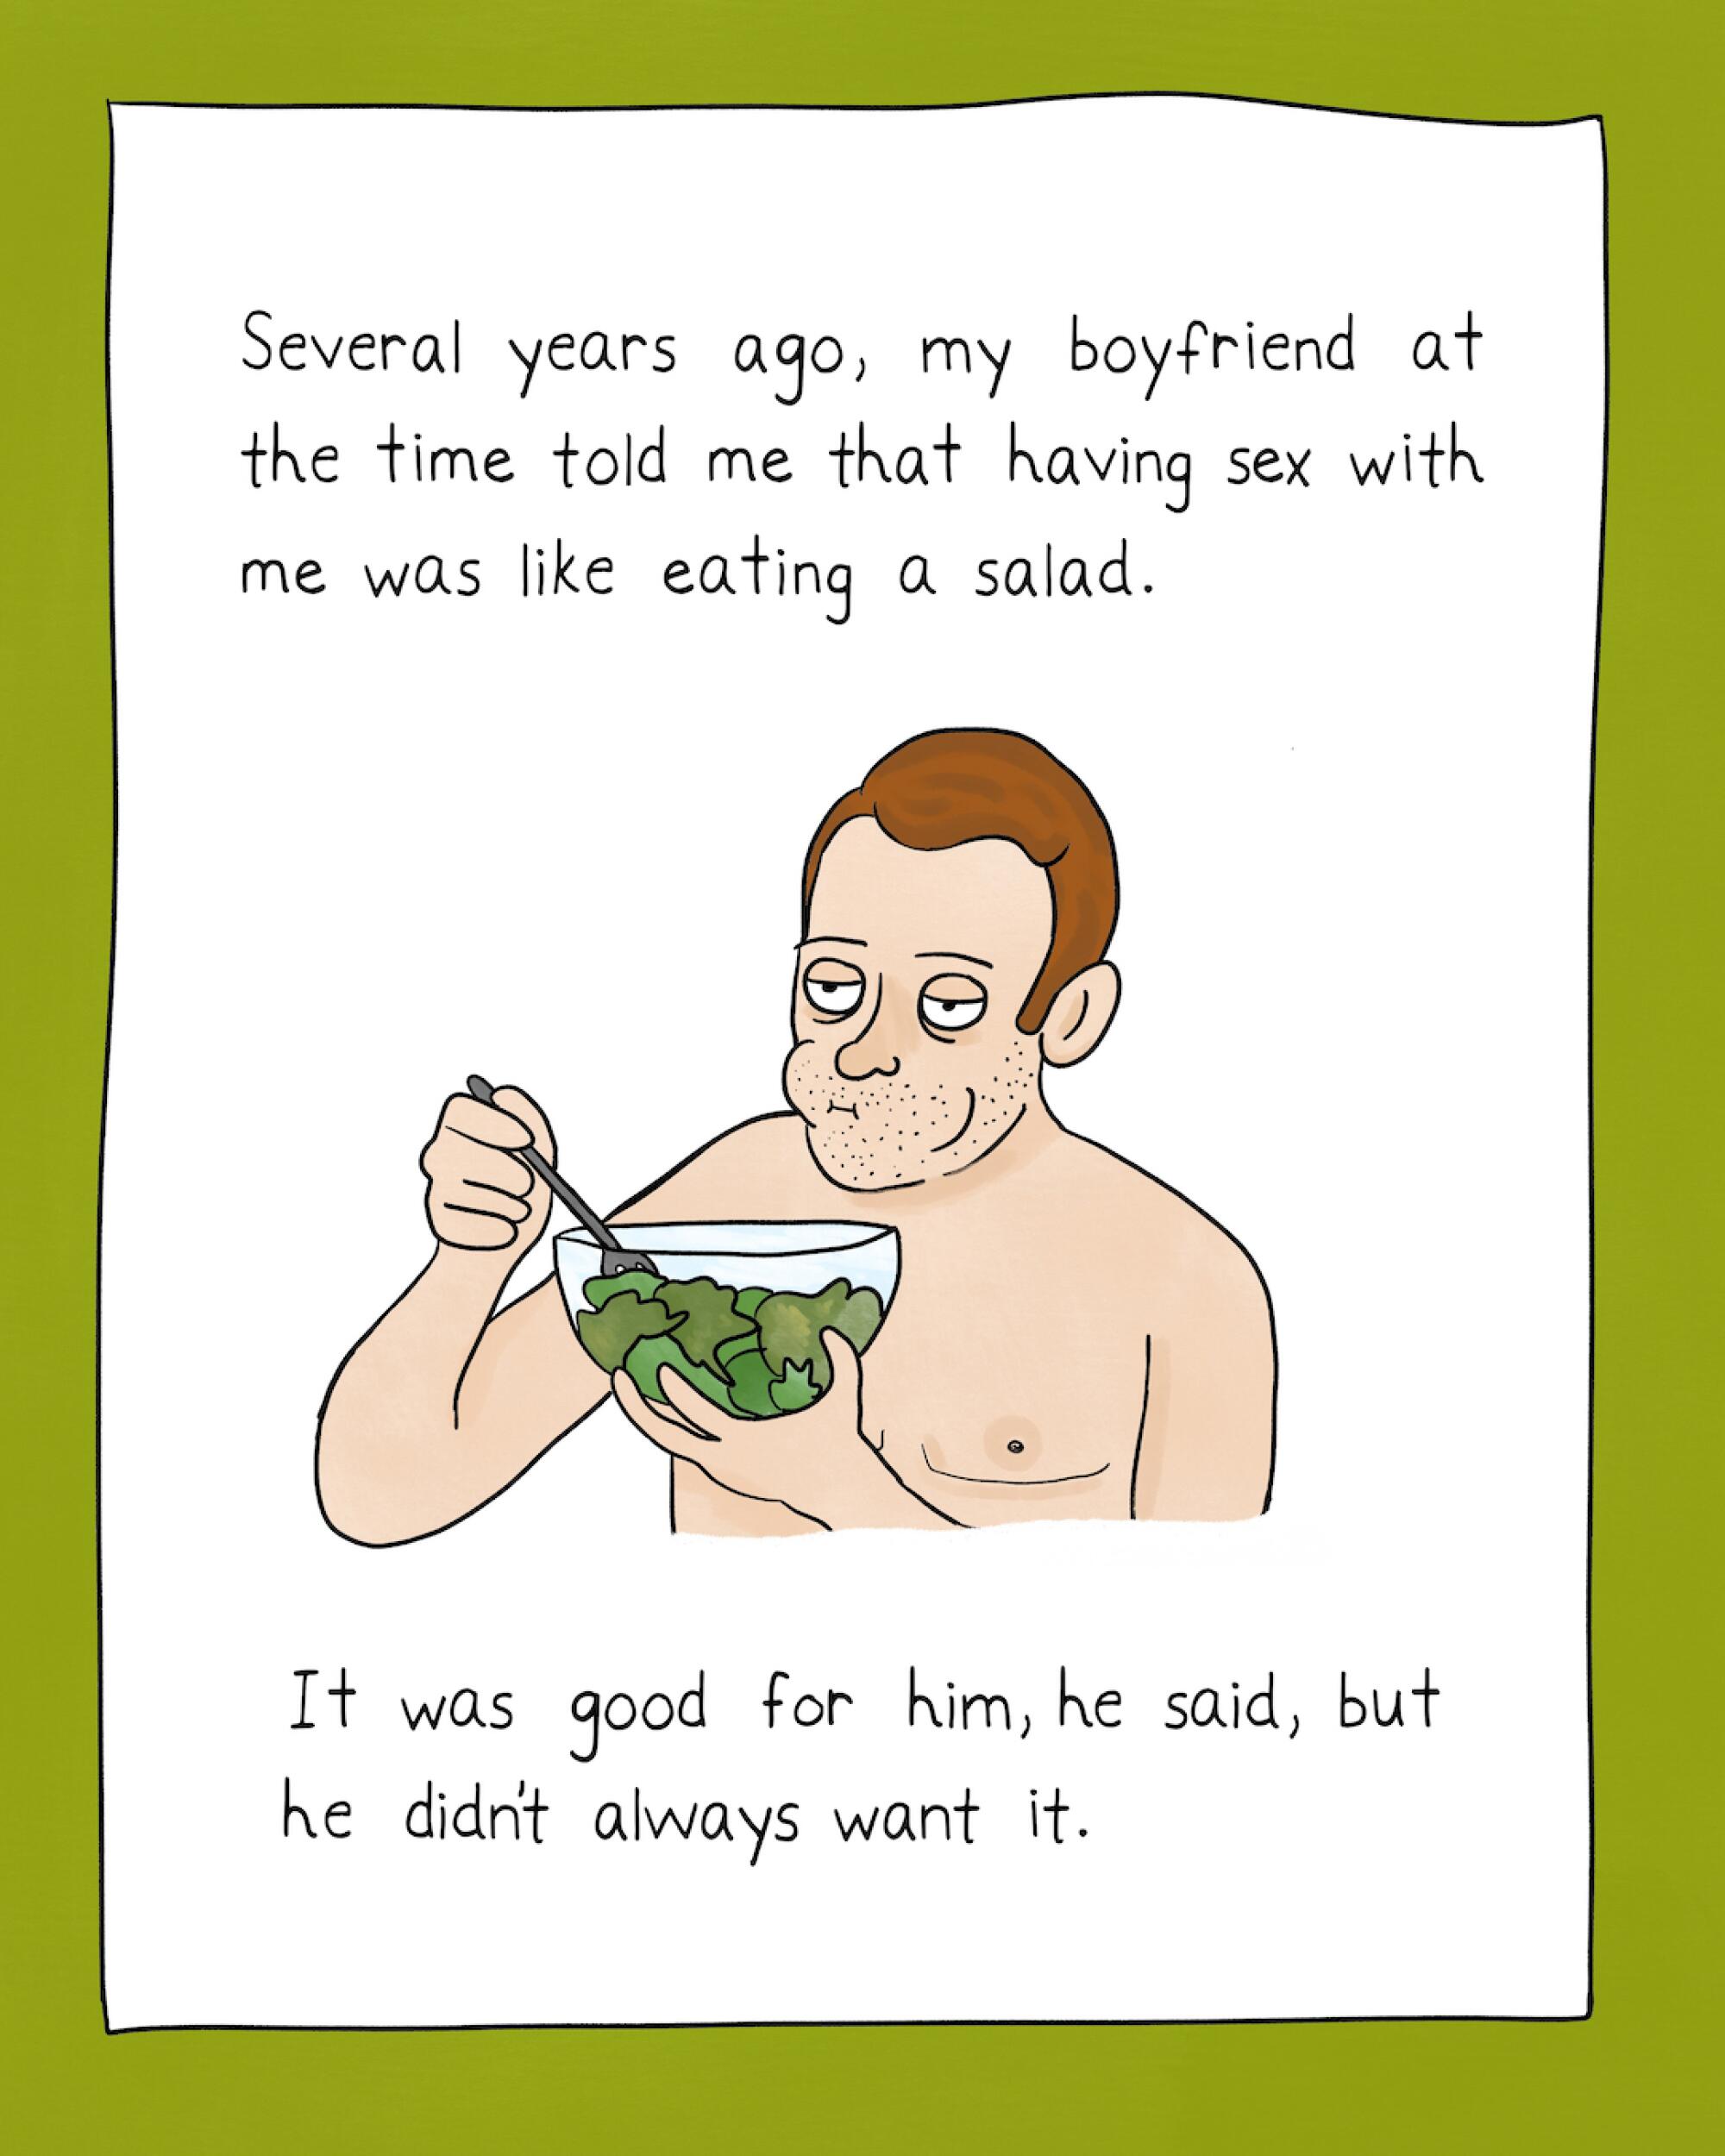 "Several years ago, my boyfriend at the time told me that having sex with me was like eating a salad."